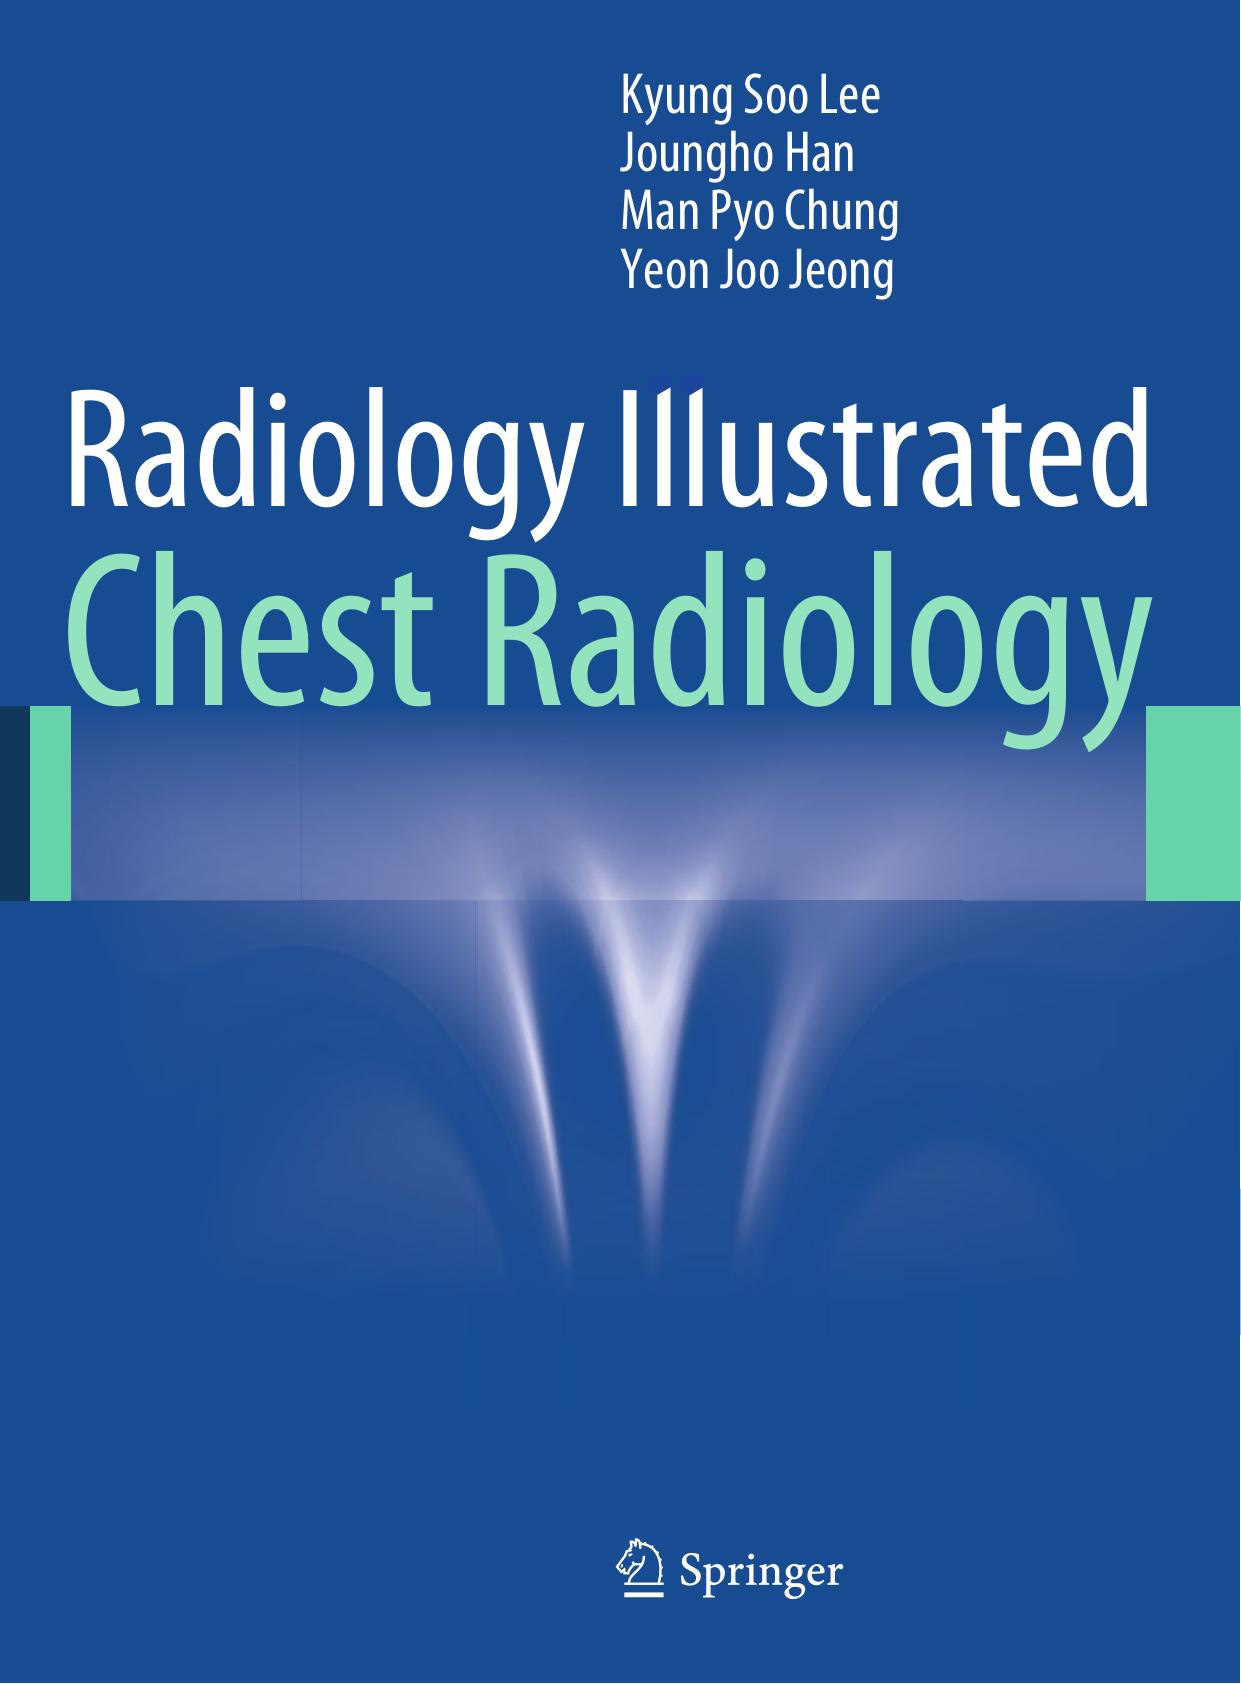 Radiology Illustrated  Chest Radiology ( PDFDrive.com )